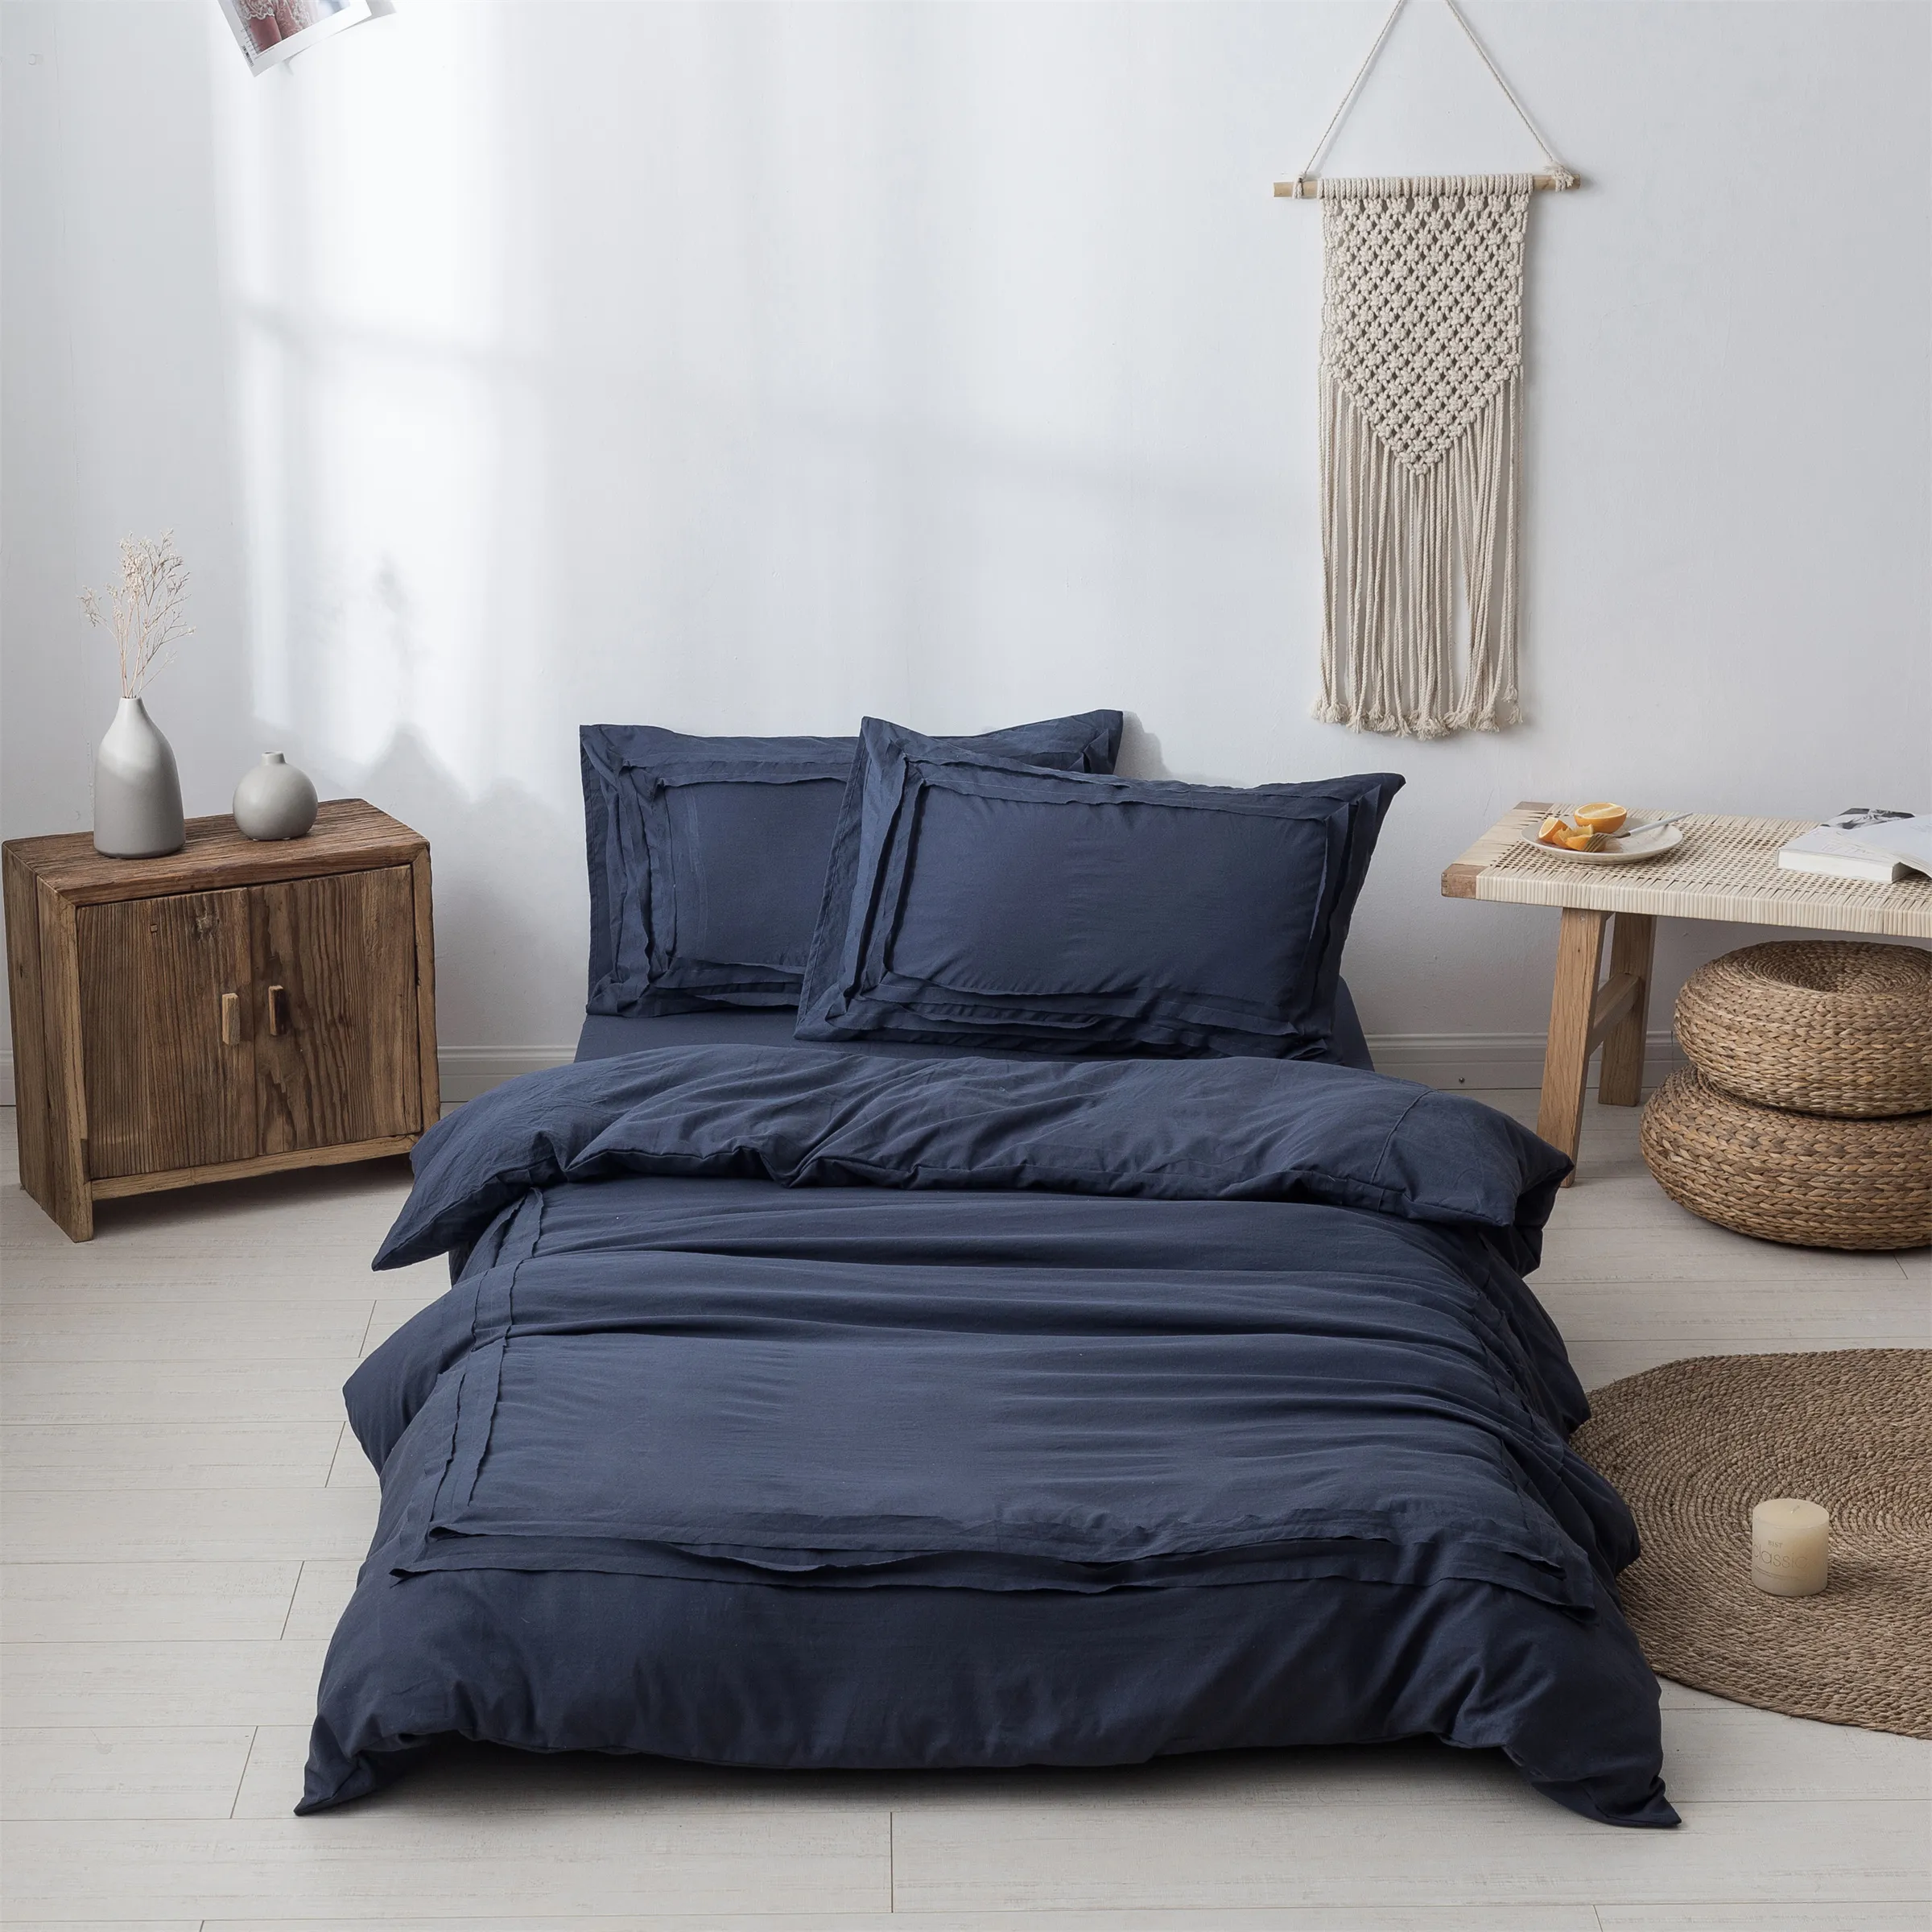 

2/3pcs Simple and Minimalist Style Bedding Set, including Pillowcases and Duvet Cover